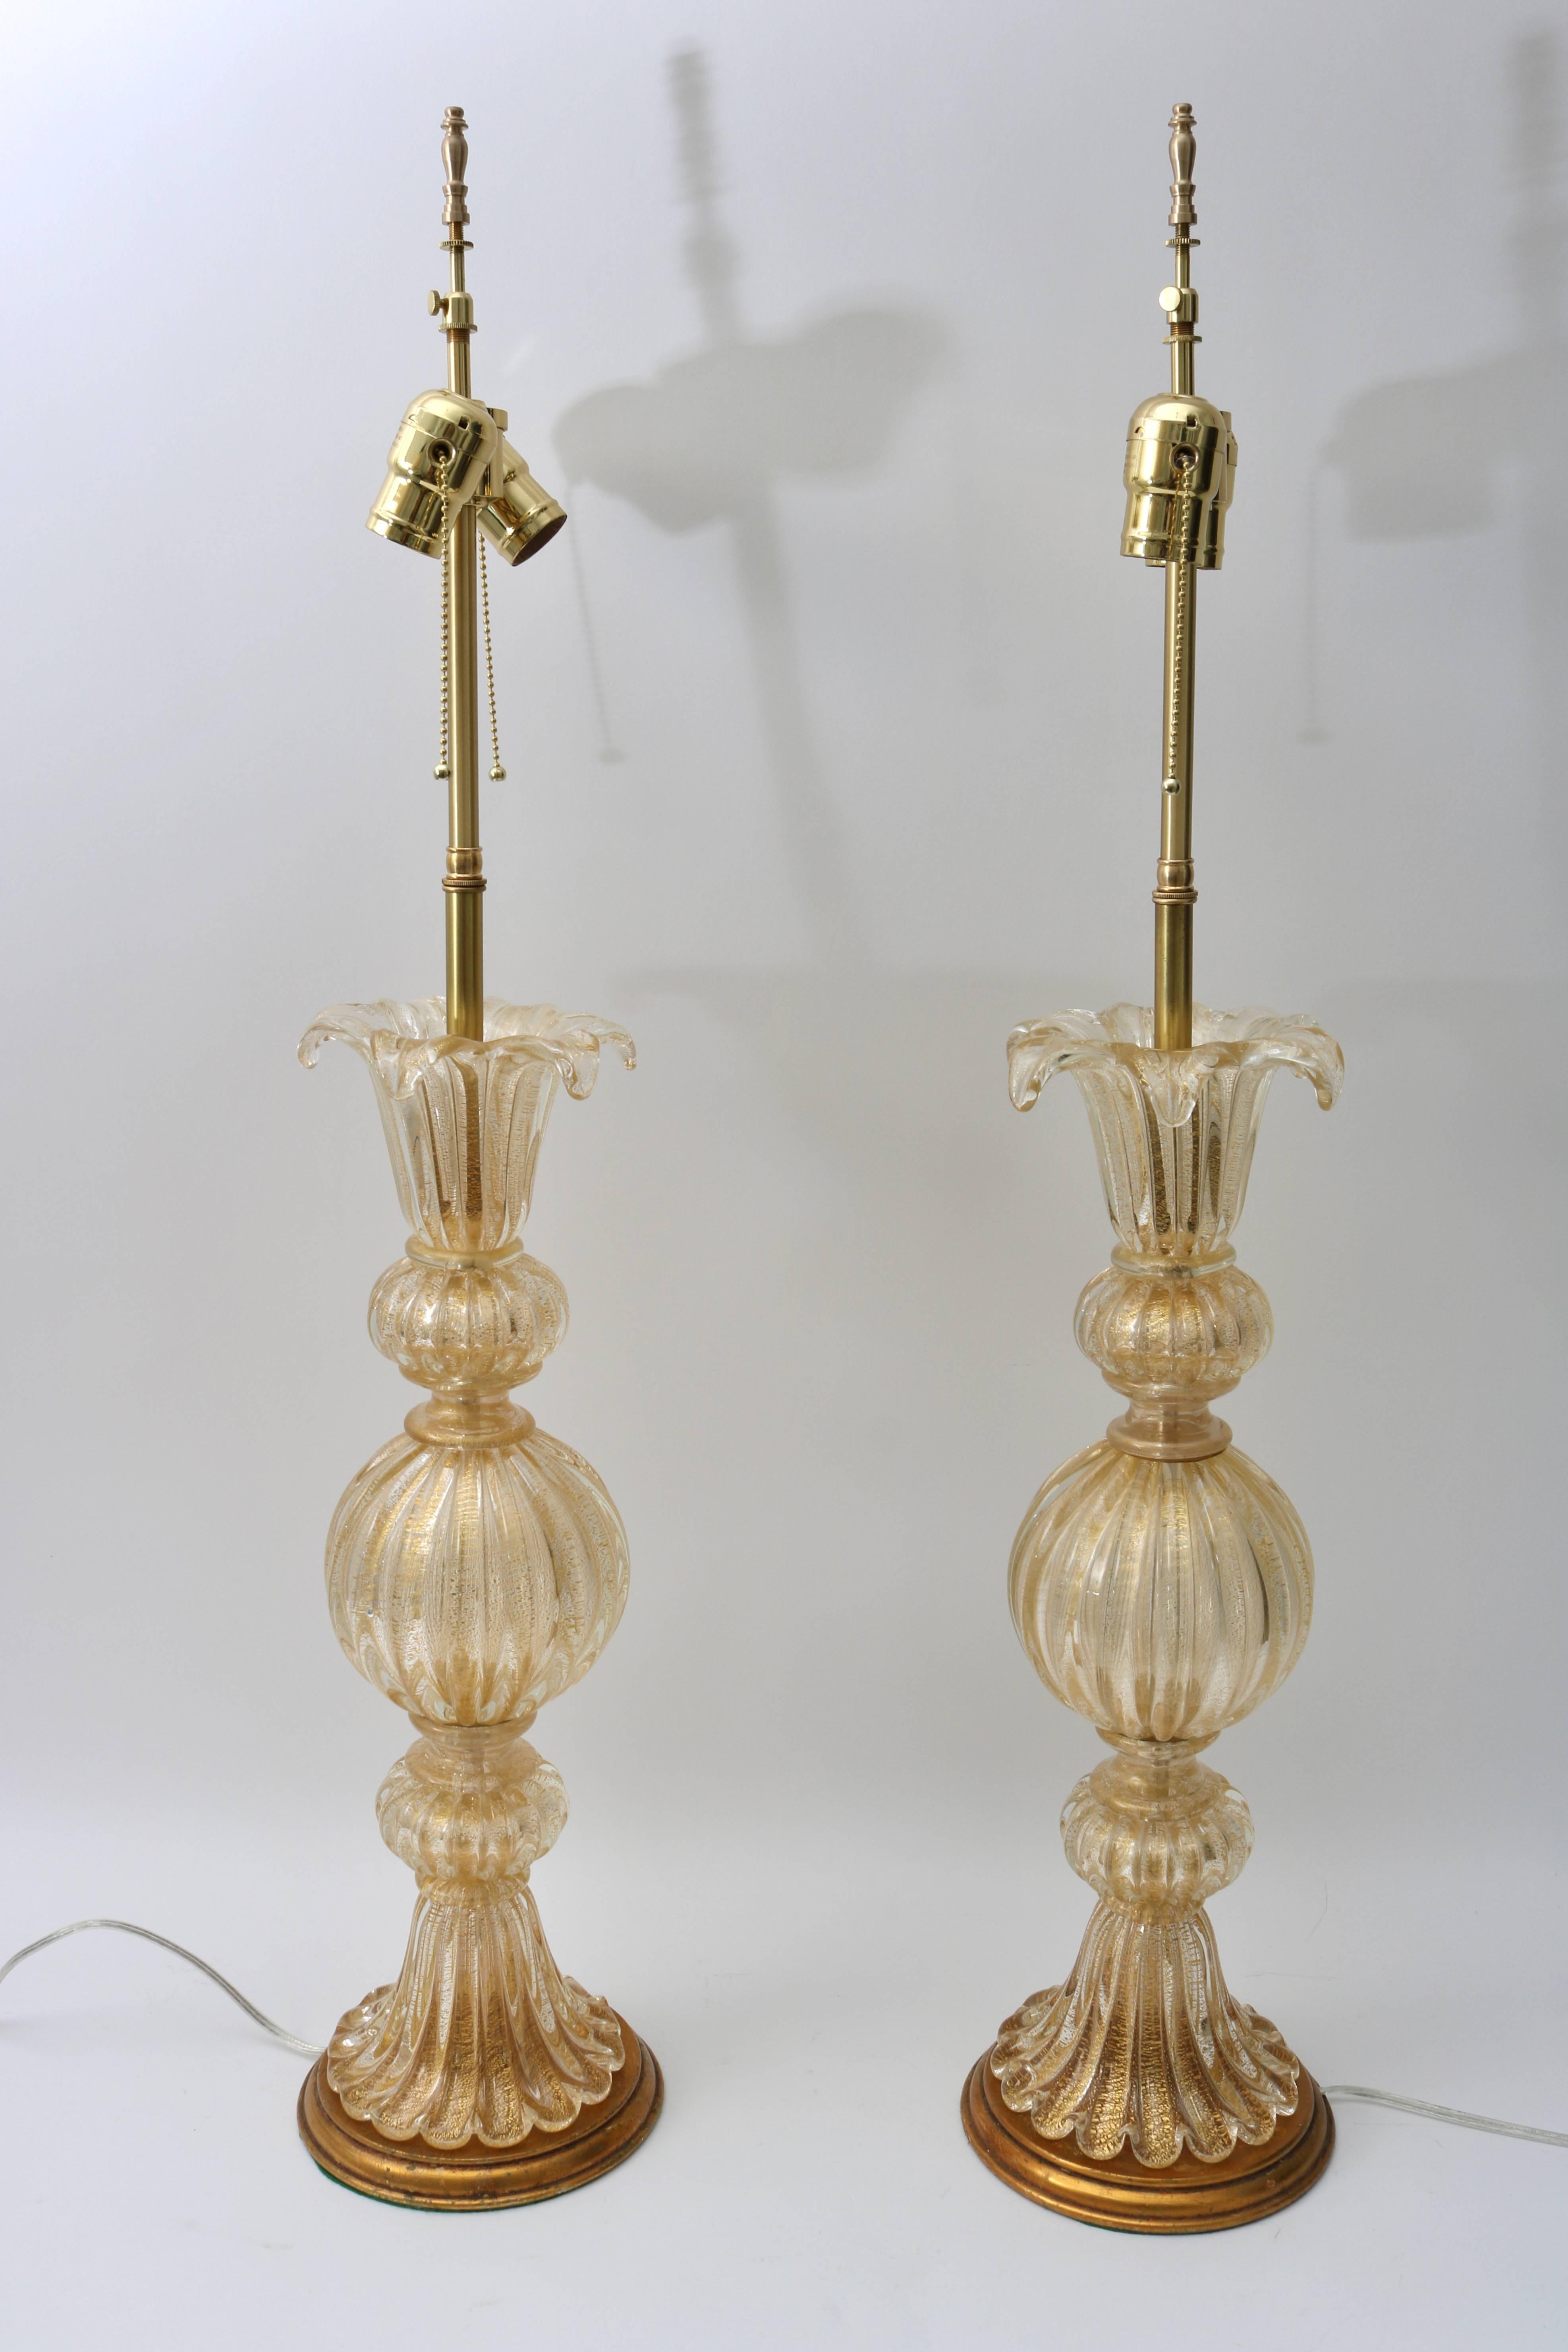 This stylish pair of Murano glass table lamps were recently acquired from a Palm Beach estate and were created in the 1960s by the iconic workshop of Barovier et Toso. They are in a clear-gold colorations with antique gold finished base and polished